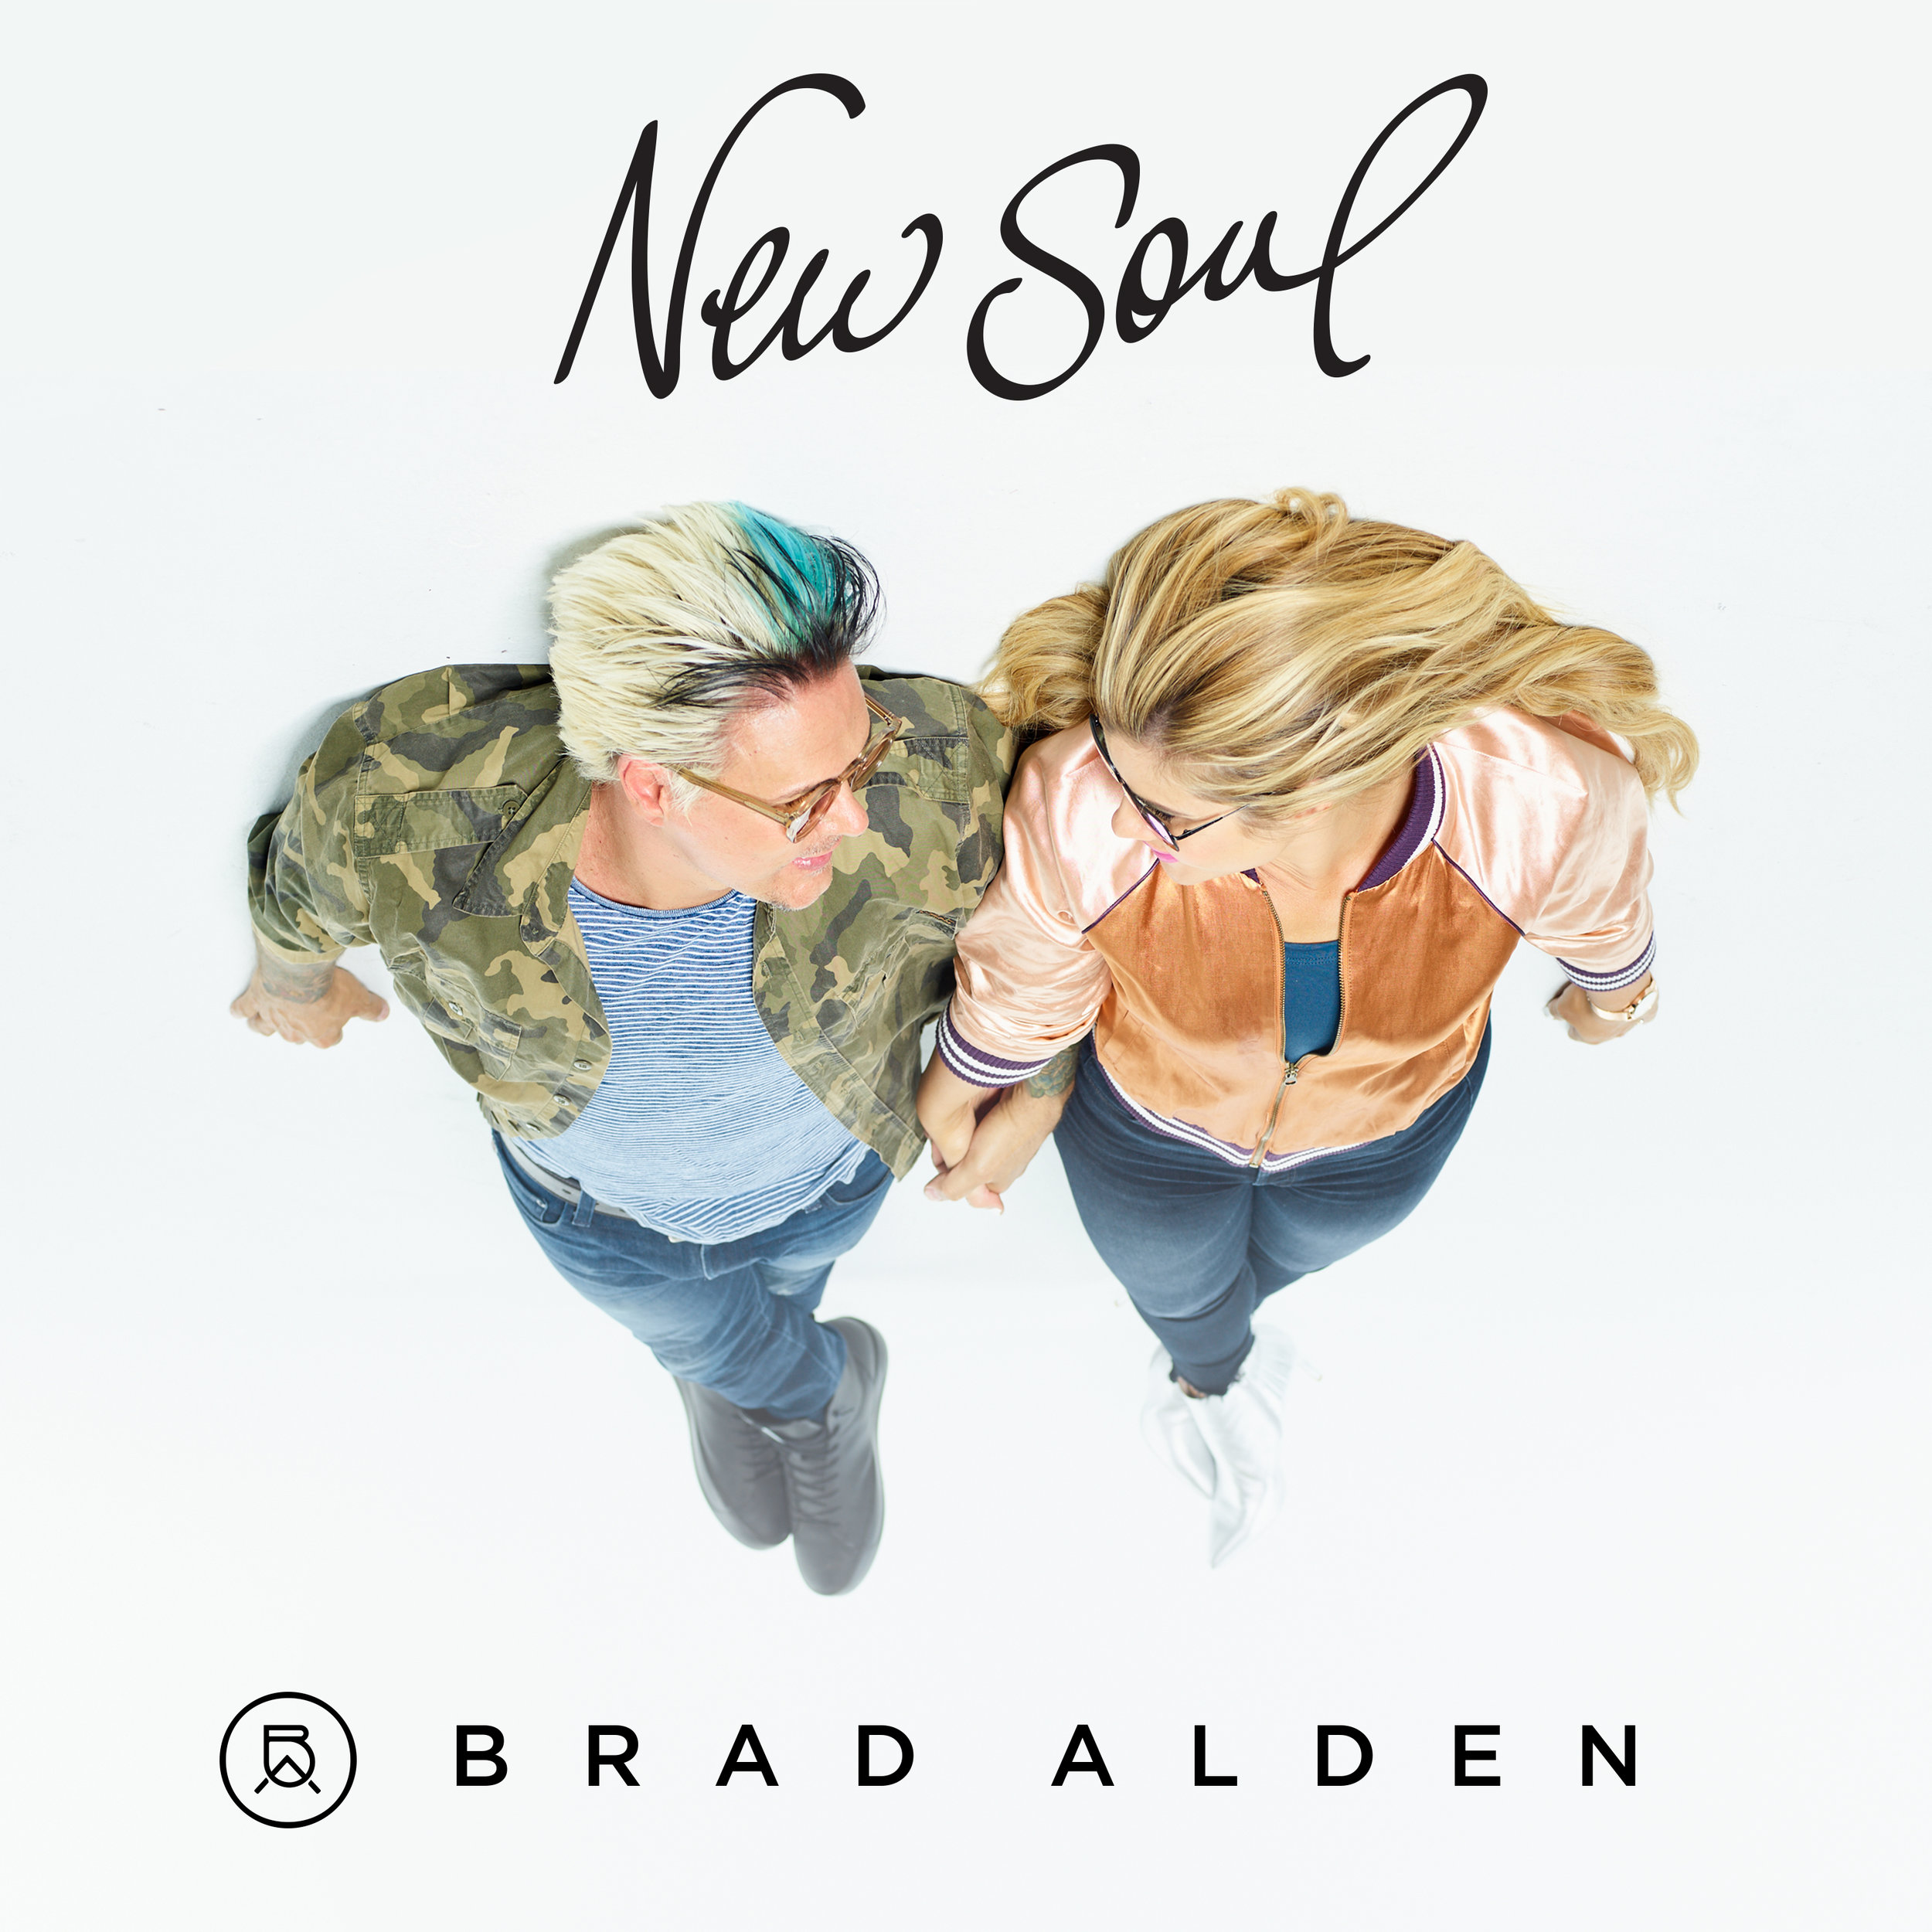 NEW SOUL EP (GOOD DAY, MORE OF YOUR LOVE, PRAISE THE LORD)